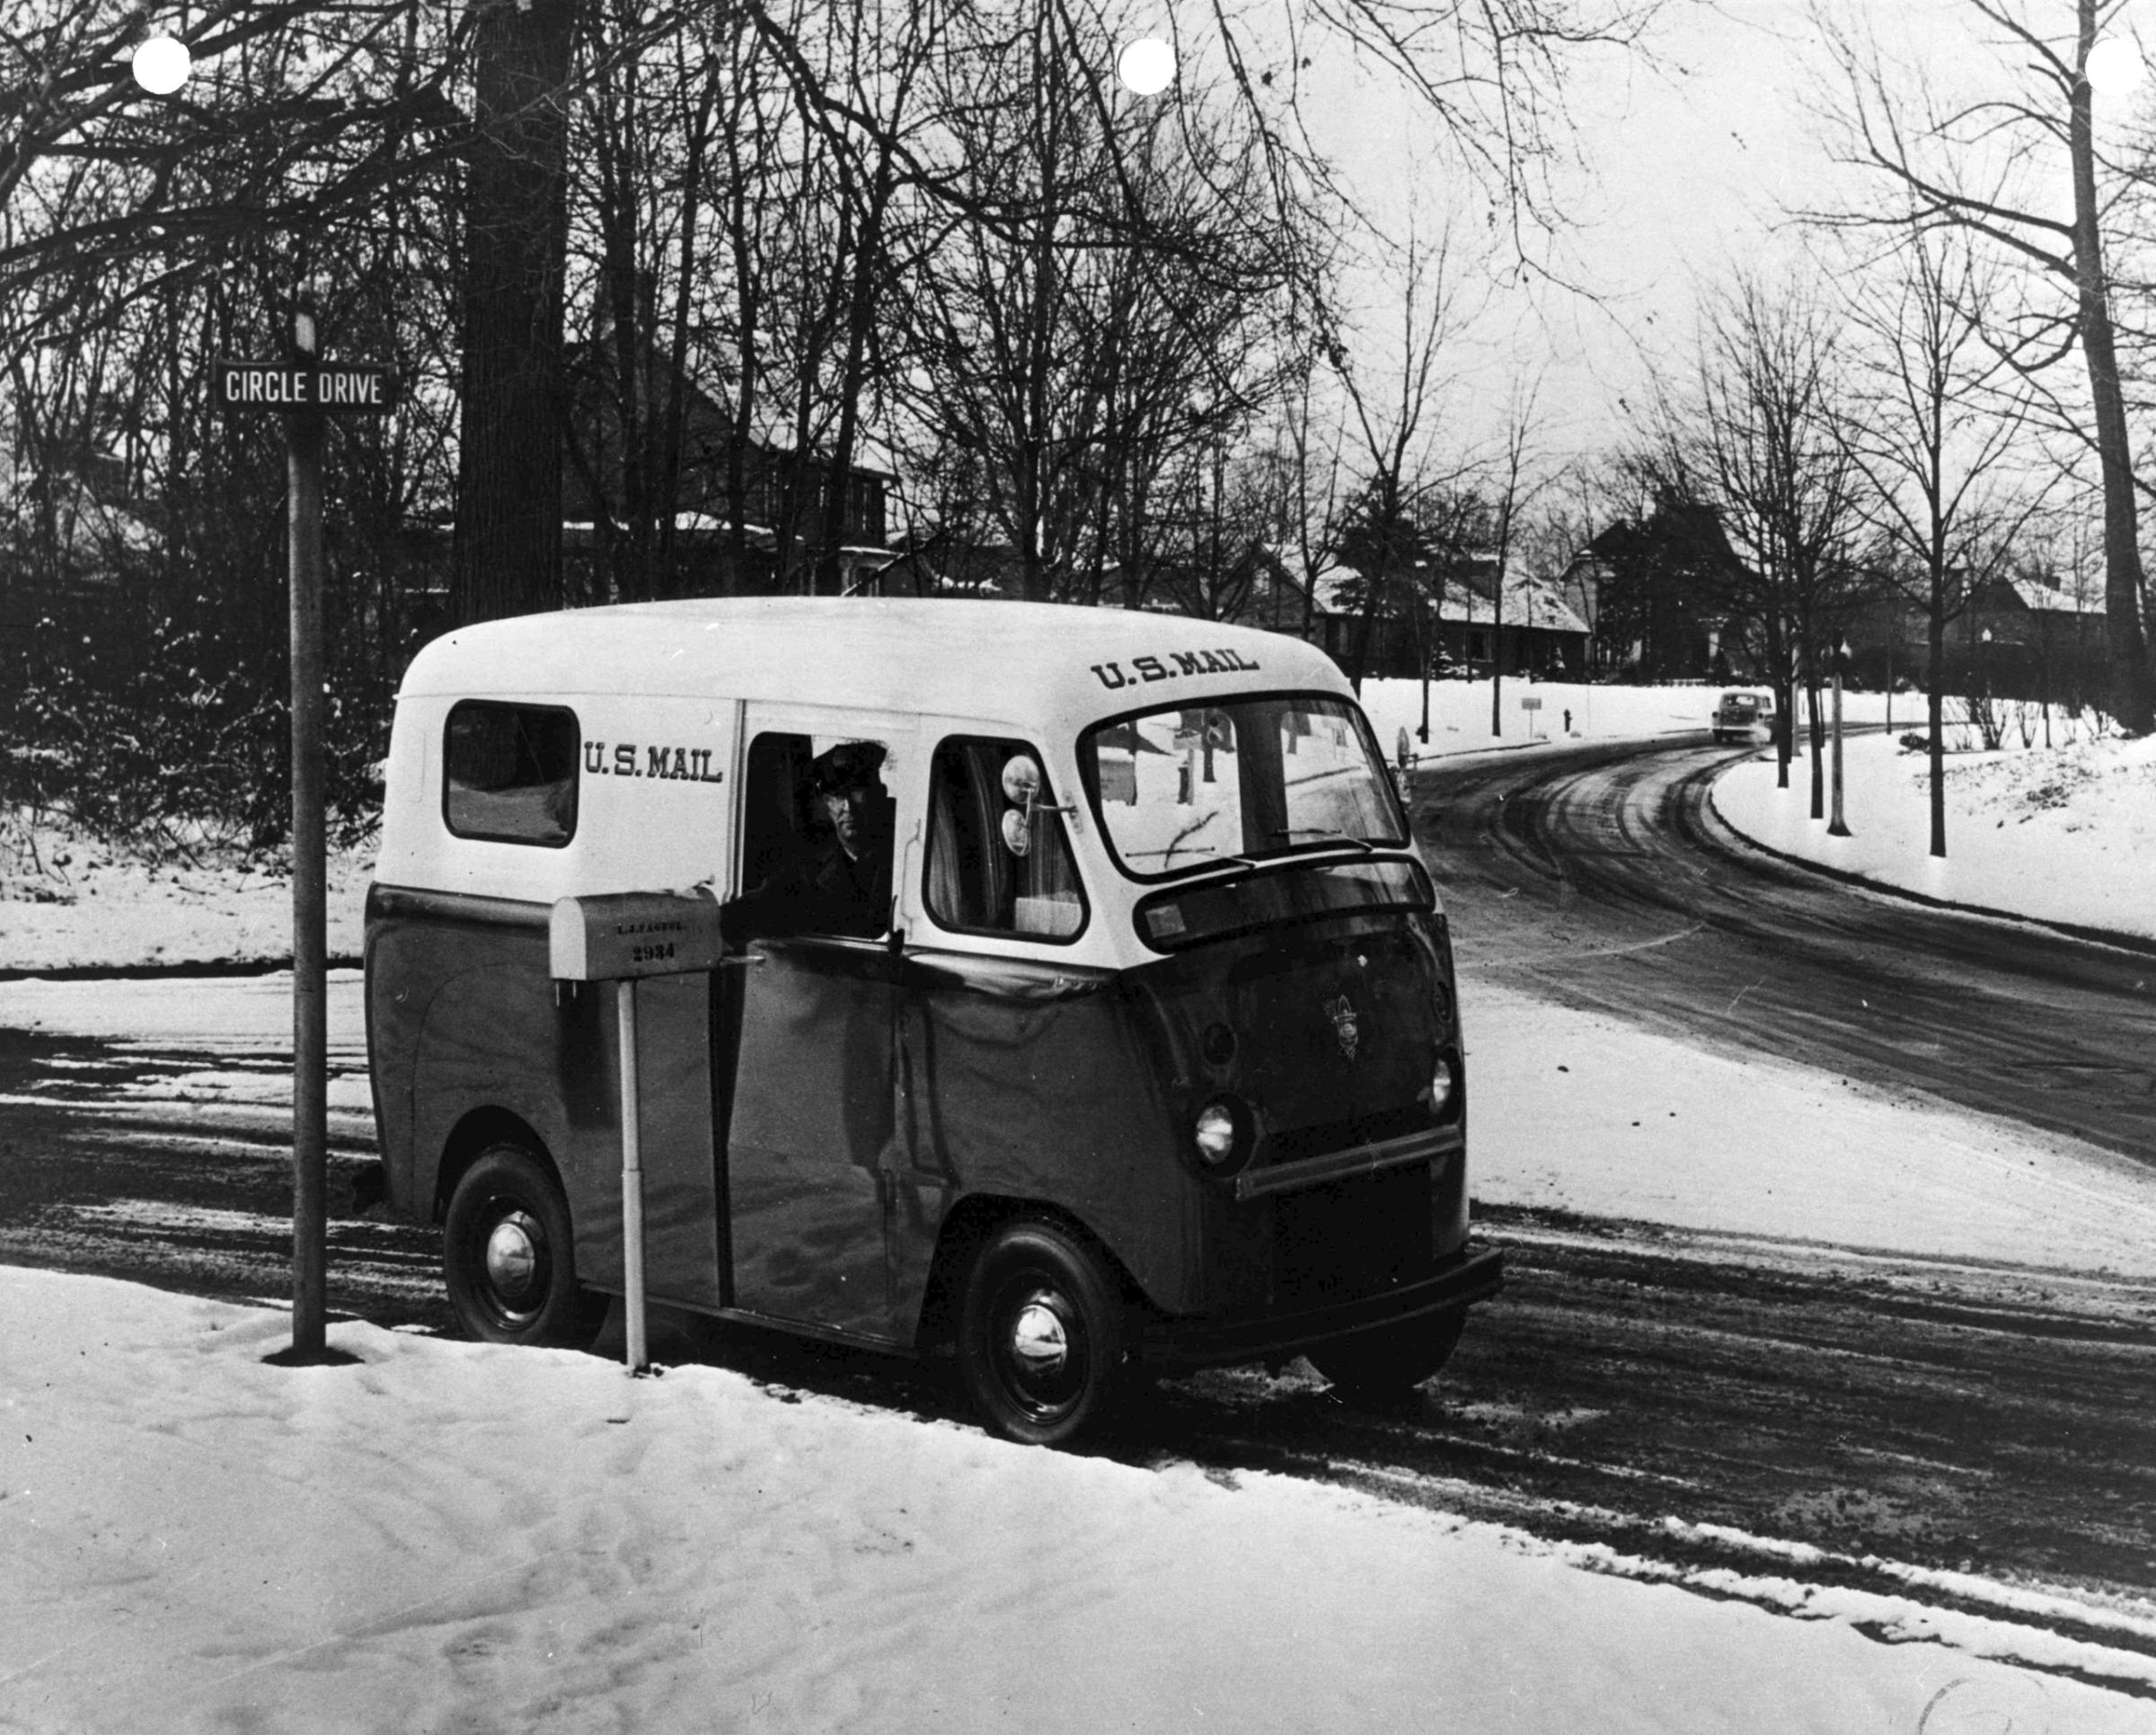 A letter carrier drives one of the Department’s new right-hand drive vans on the snowy streets of an unidentified city. The Department ordered thousands of new postal vehicles in the early 1950s as part of its post-war modernization plan. A variety of vehicles were ordered, including right-hand drive step vans such as this. Many of the new vehicles performed adequately, but few of the dozens of different styles ordered were re-ordered in large quantities. 1953.